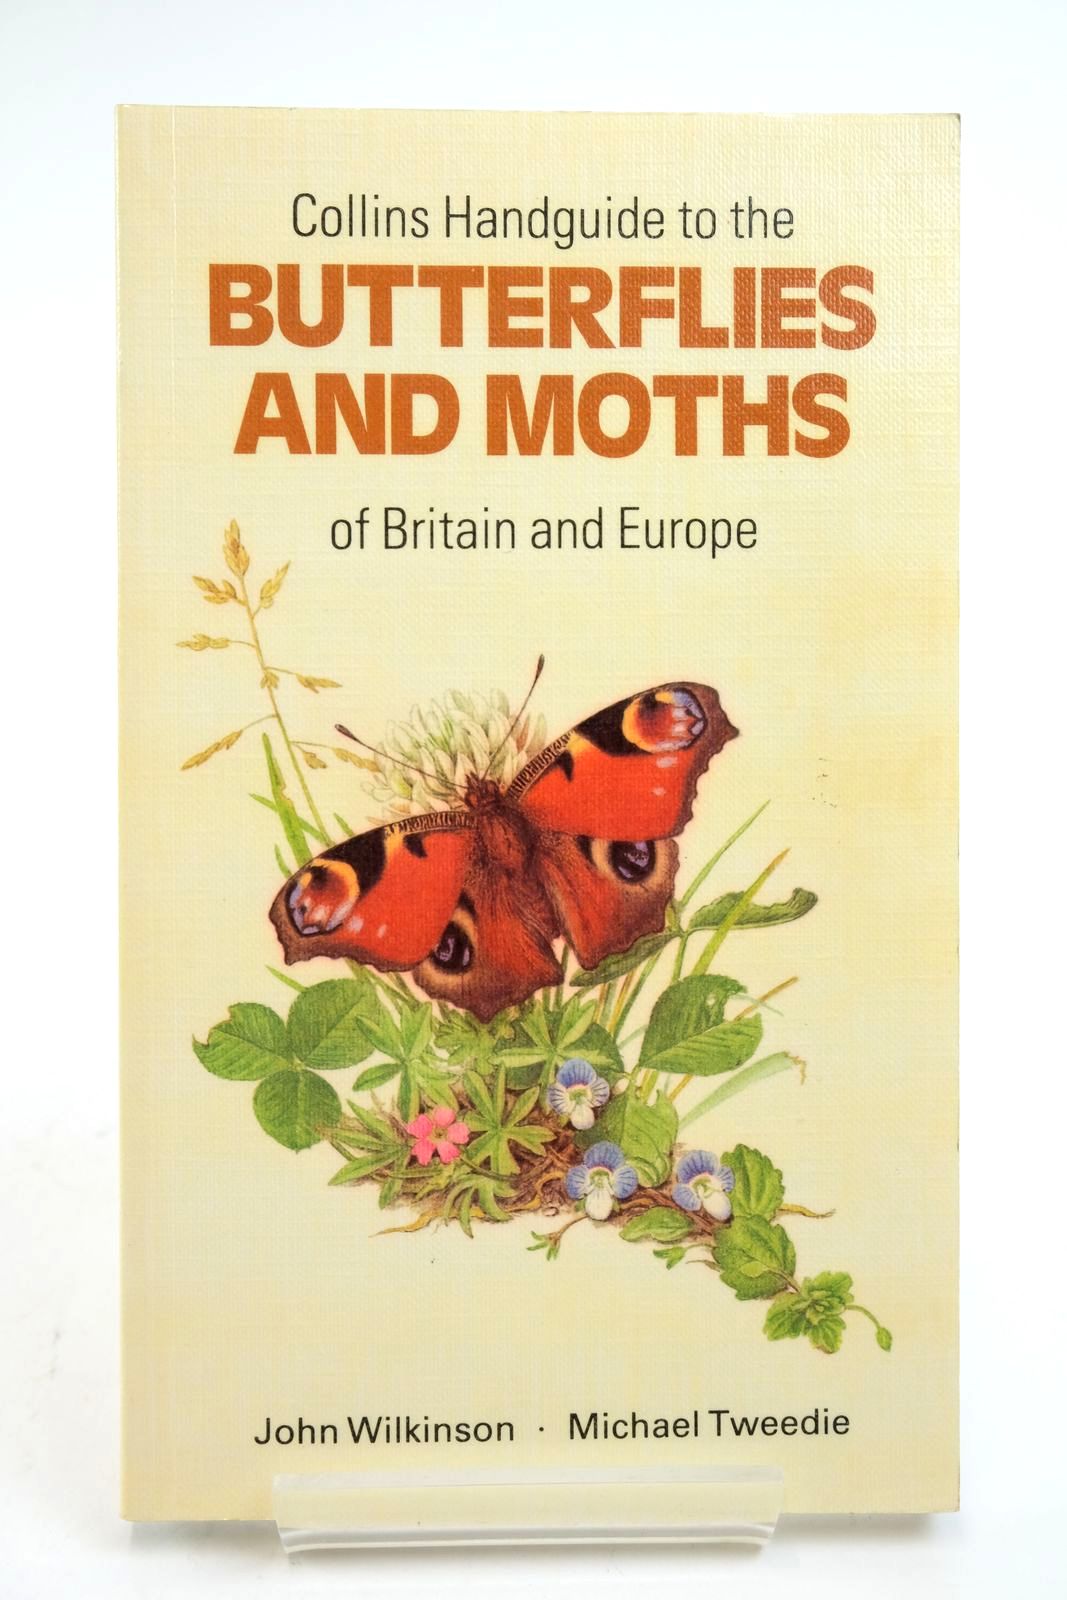 Photo of COLLINS HANDGUIDE TO THE BUTTERFLIES AND MOTHS OF BRITAIN AND EUROPE written by Tweedie, Michael illustrated by Wilkinson, John published by Collins (STOCK CODE: 2139119)  for sale by Stella & Rose's Books